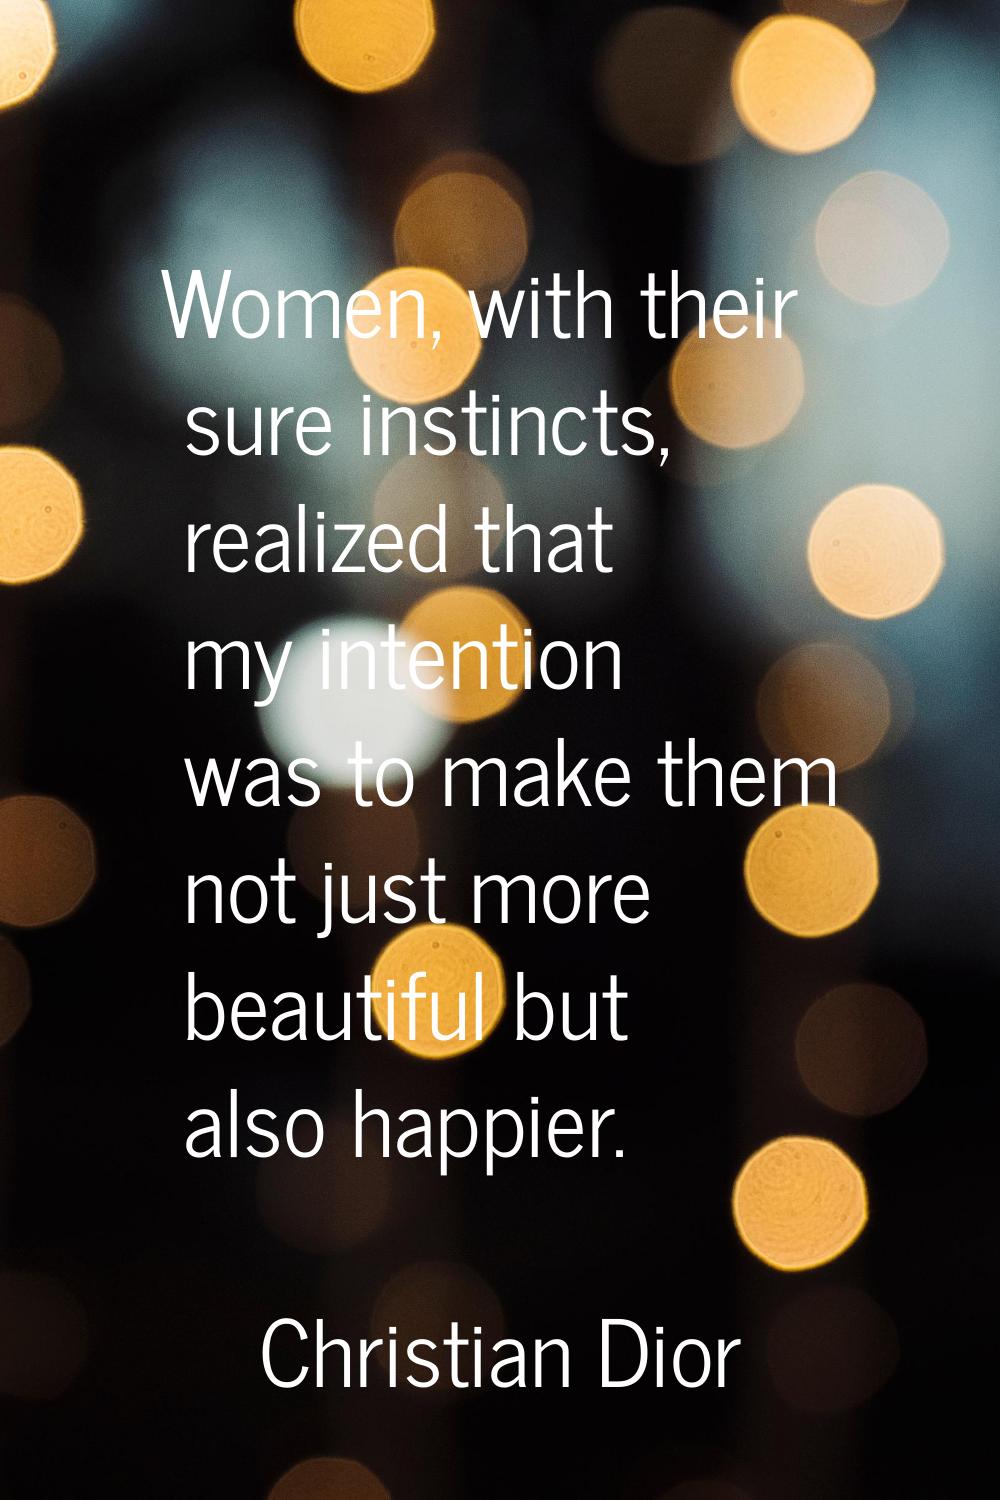 Women, with their sure instincts, realized that my intention was to make them not just more beautif